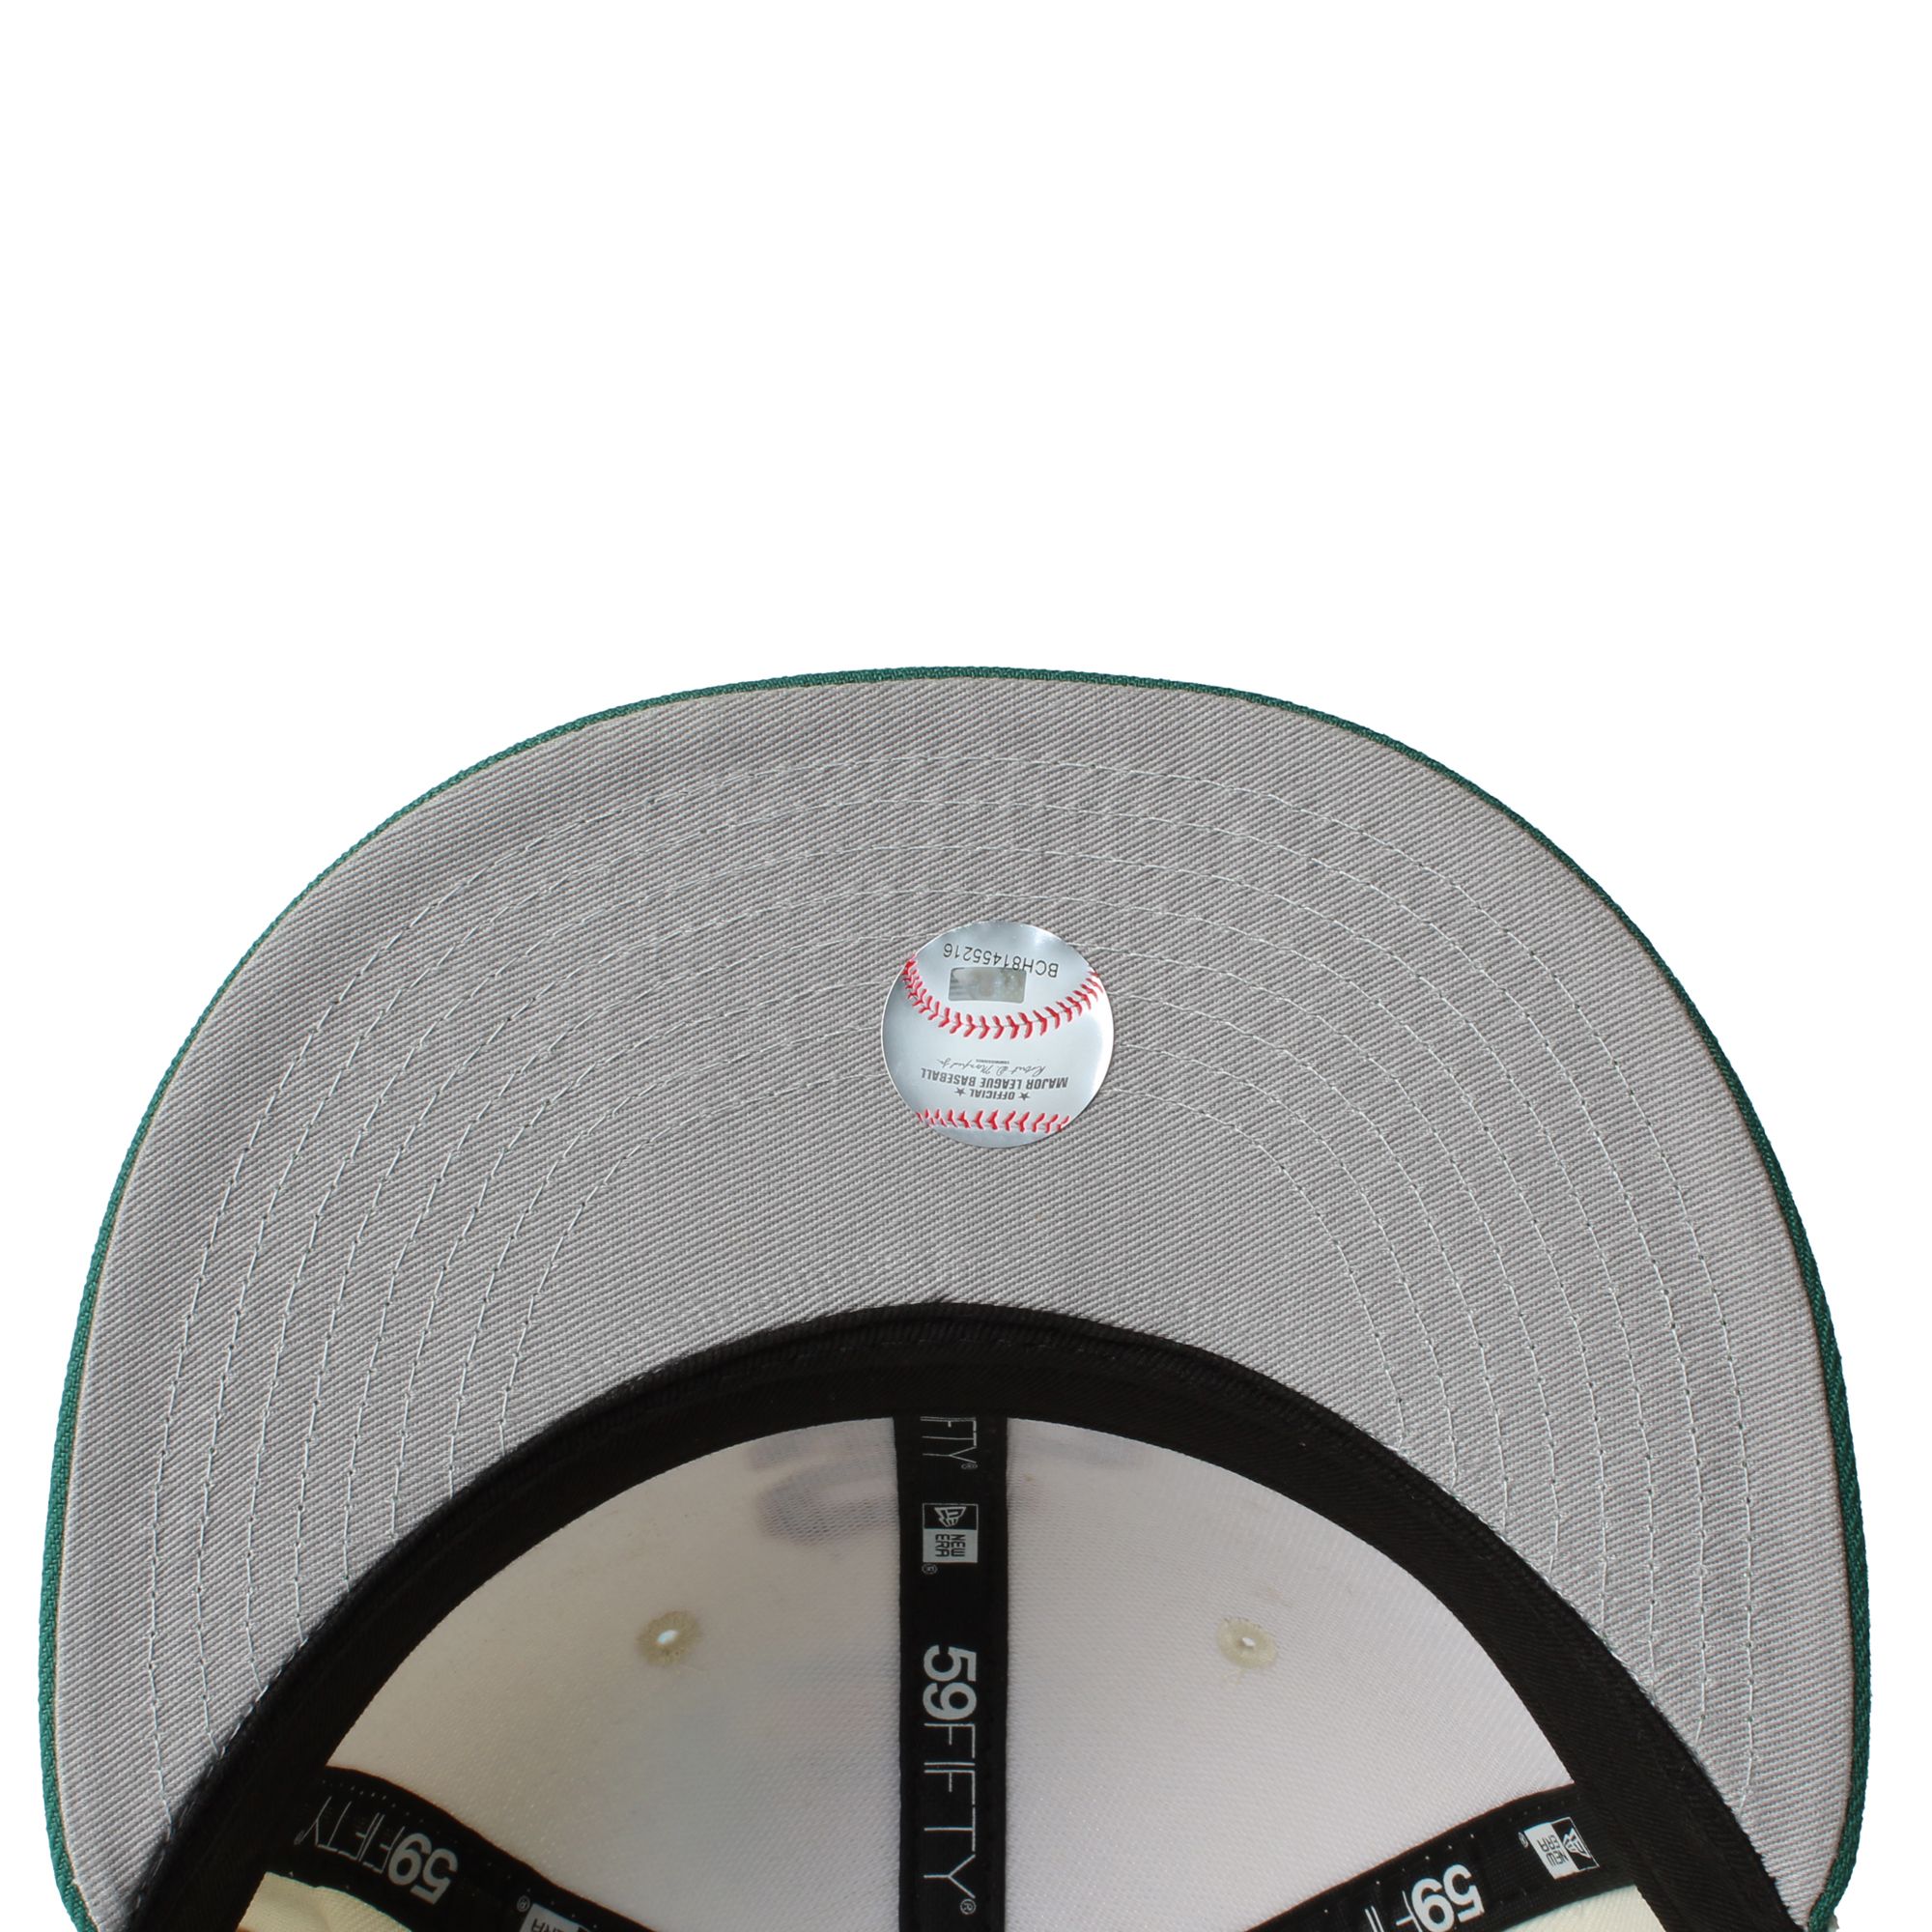 Officially Licensed MLB New Era 25th Anniversary Fitted Hat - Padres